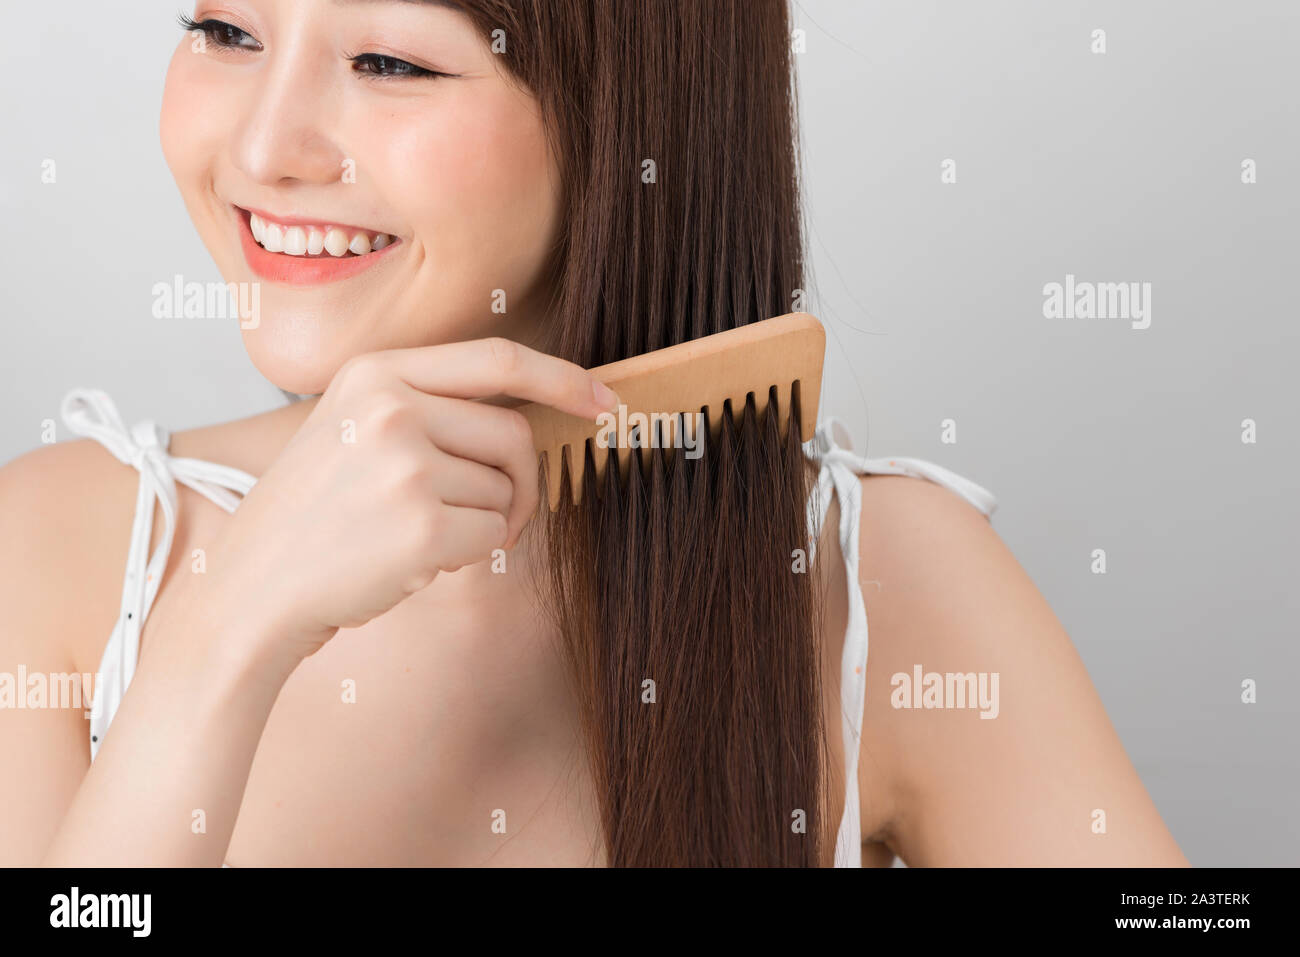 Asian woman combing her hair with a brush Stock Photo